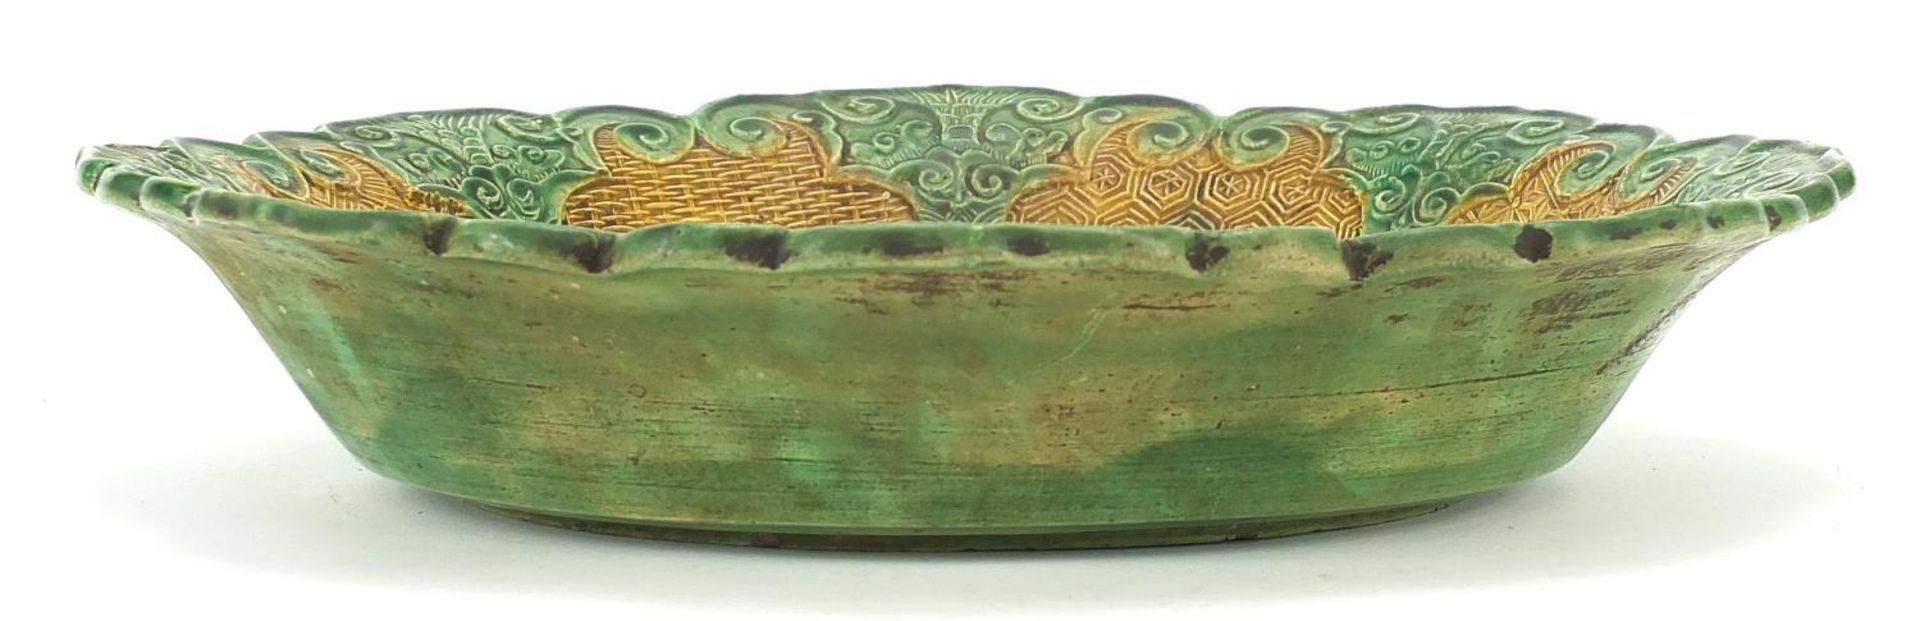 Chinese green and yellow glazed porcelain dish decorated in relief with figures in a palace setting, - Image 4 of 5